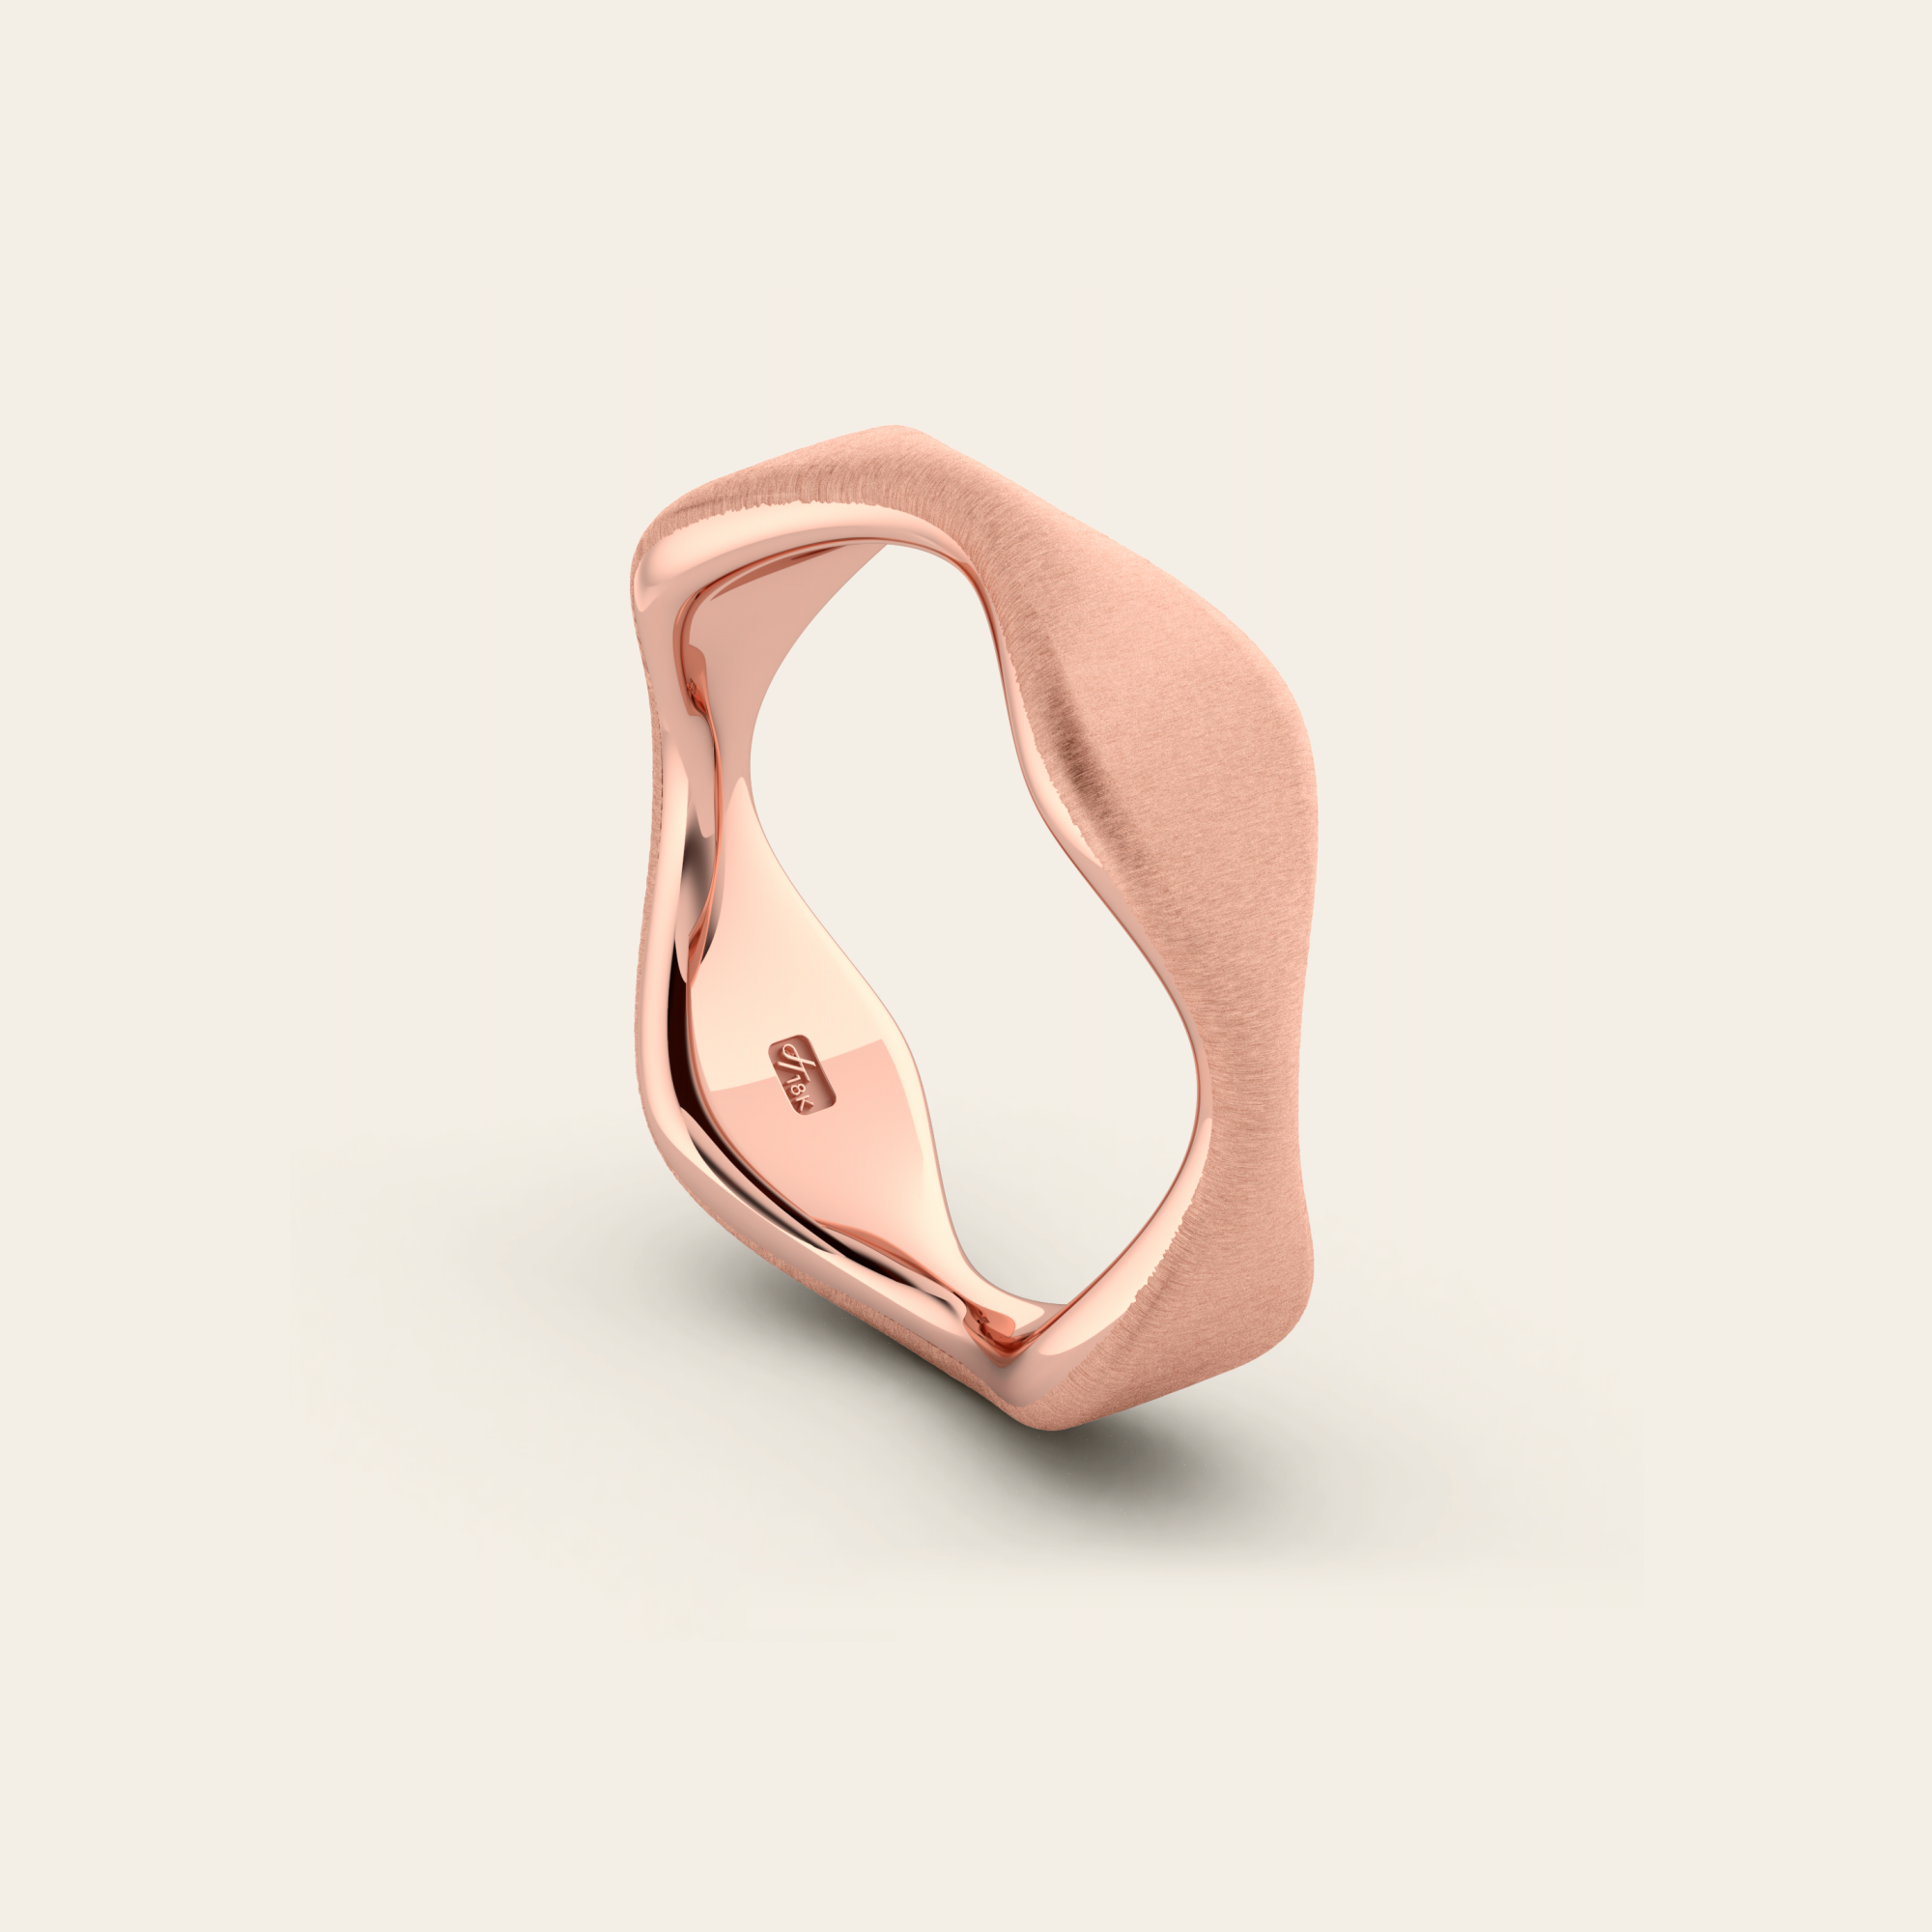 The Mirrored Curve Ring in Satin Finished 18k Rose Gold